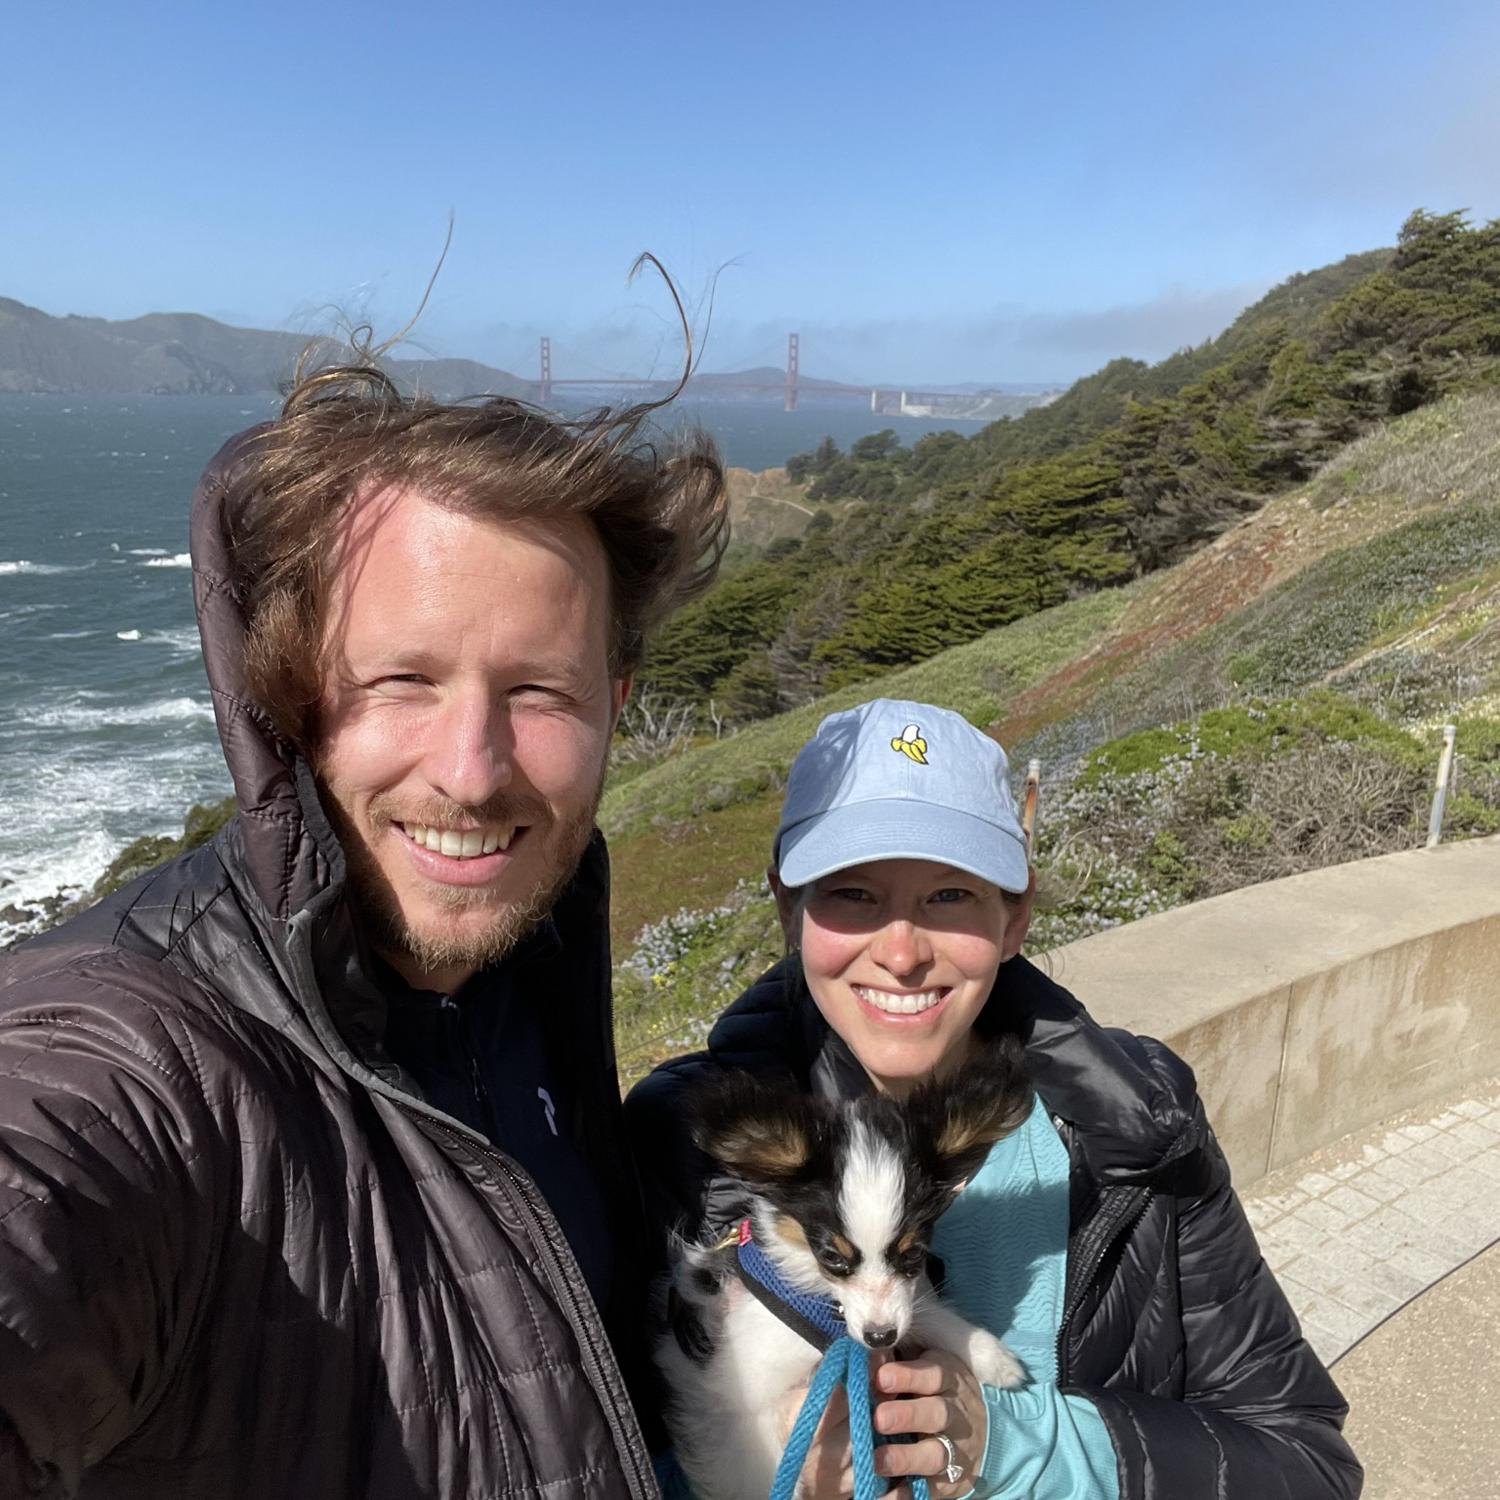 Lands End trail. Thor's first hike!